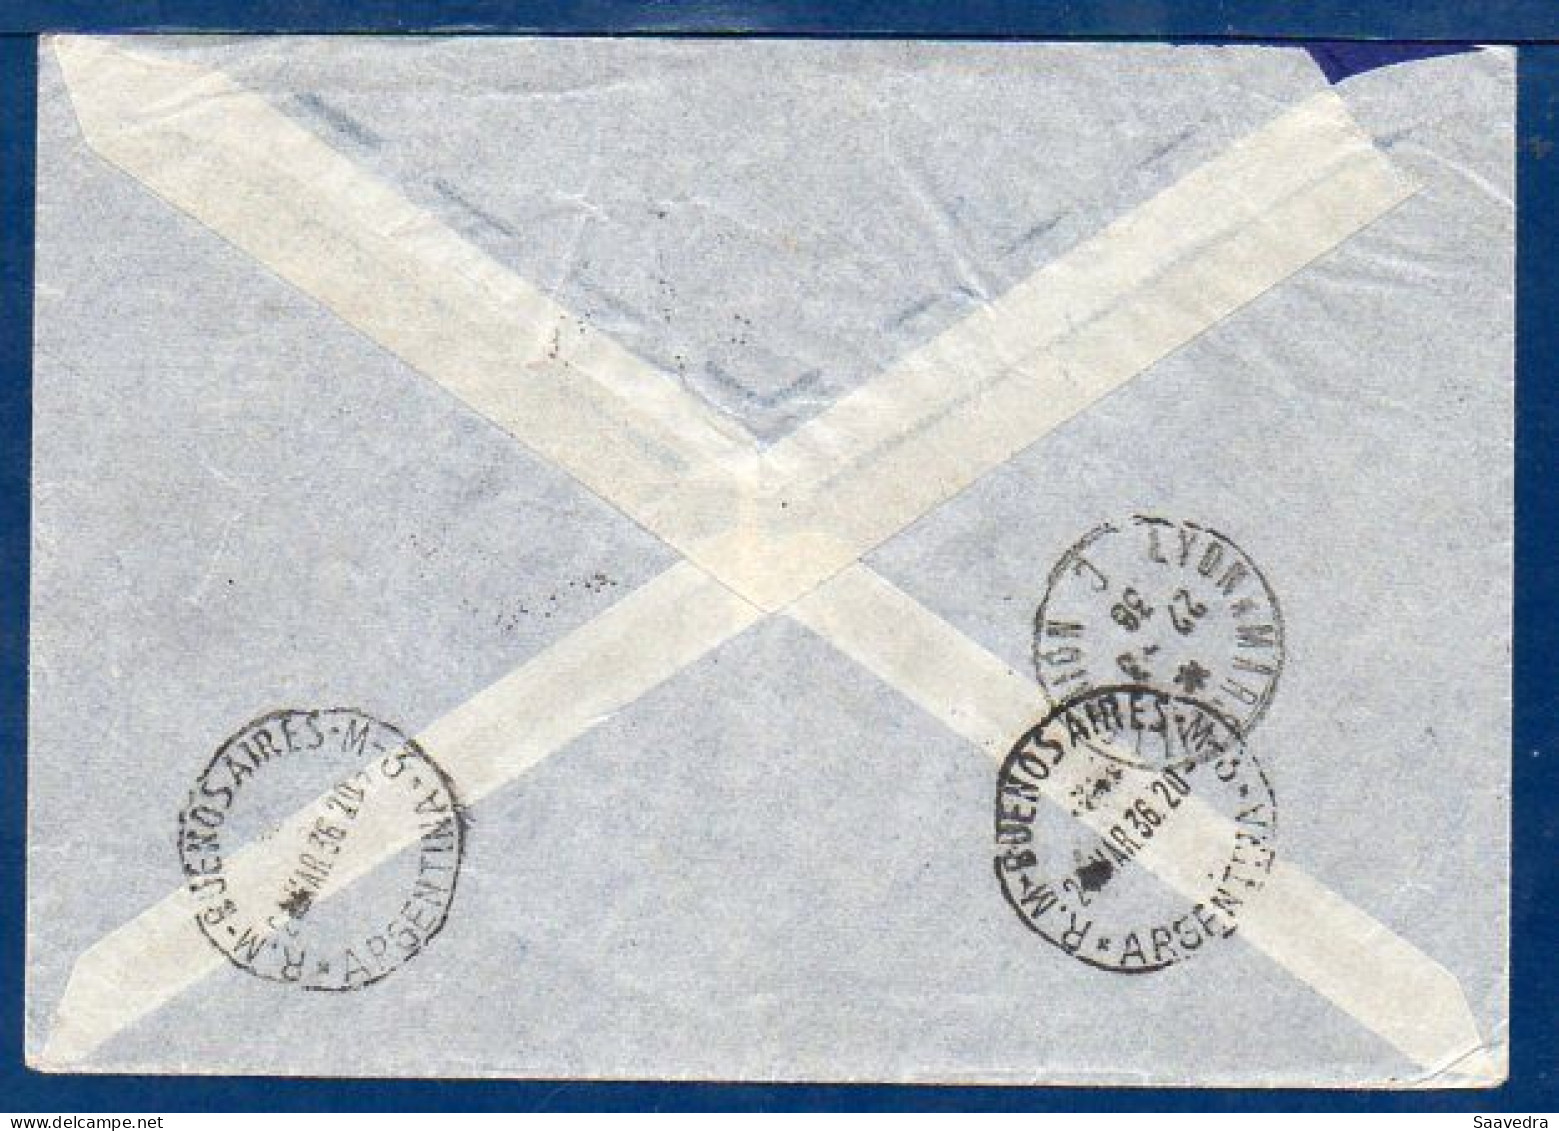 Switzerland To Argentina, 1936, Via Air France  (008) - Lettres & Documents